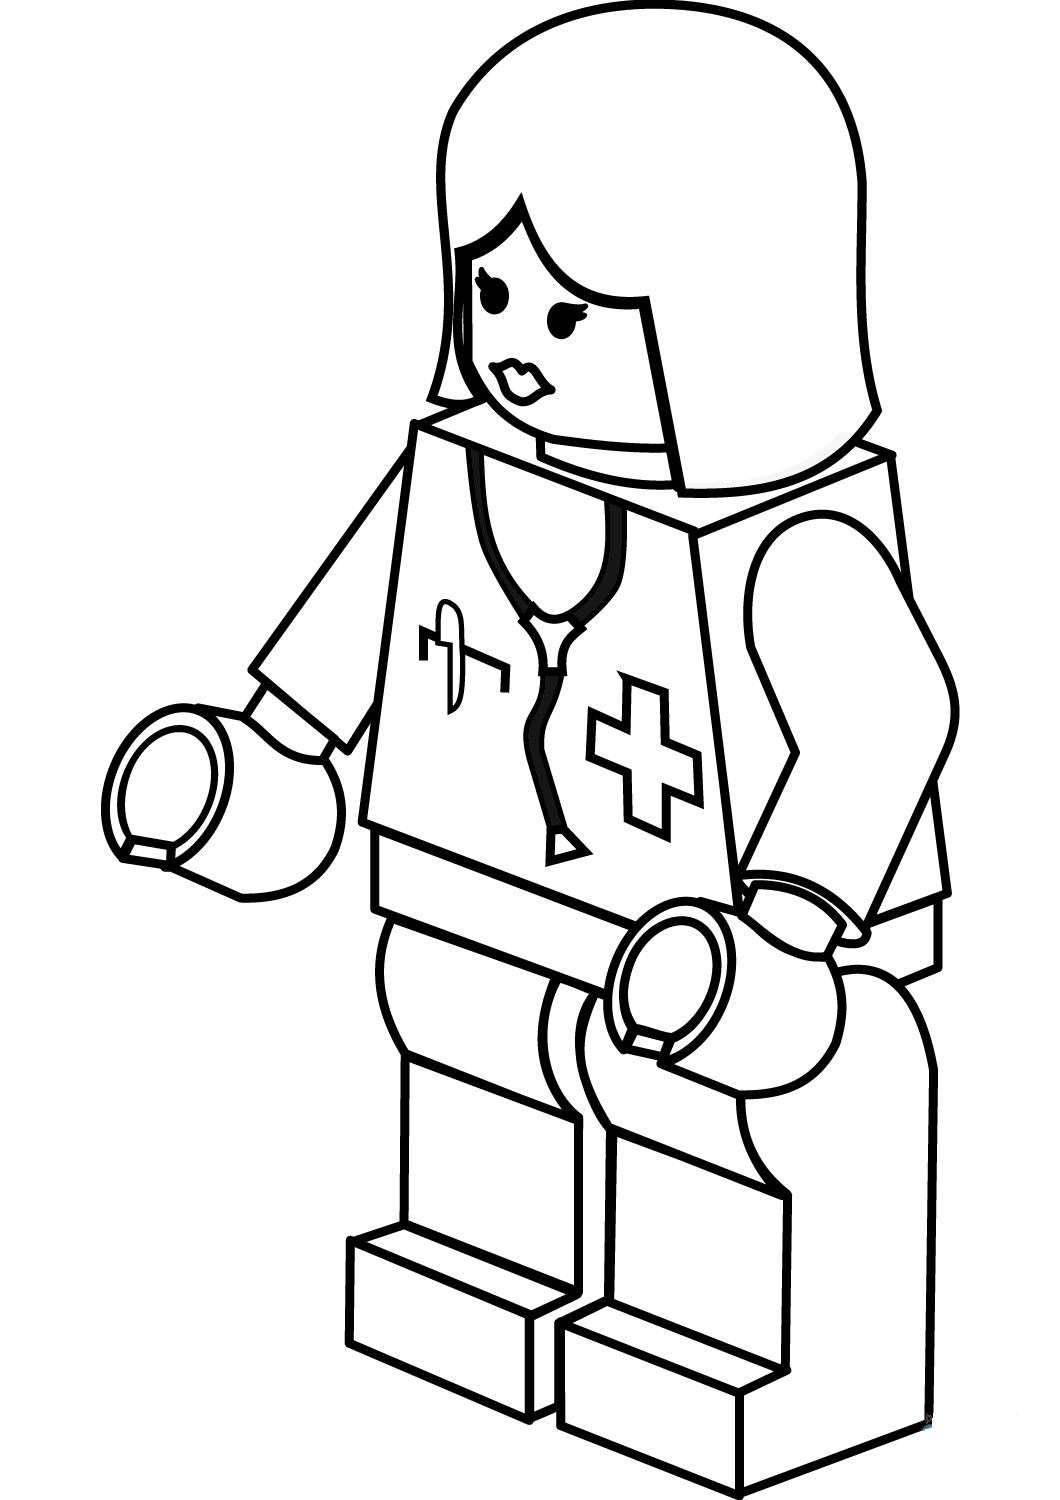 Lego City Lady Doctor Coloring Page